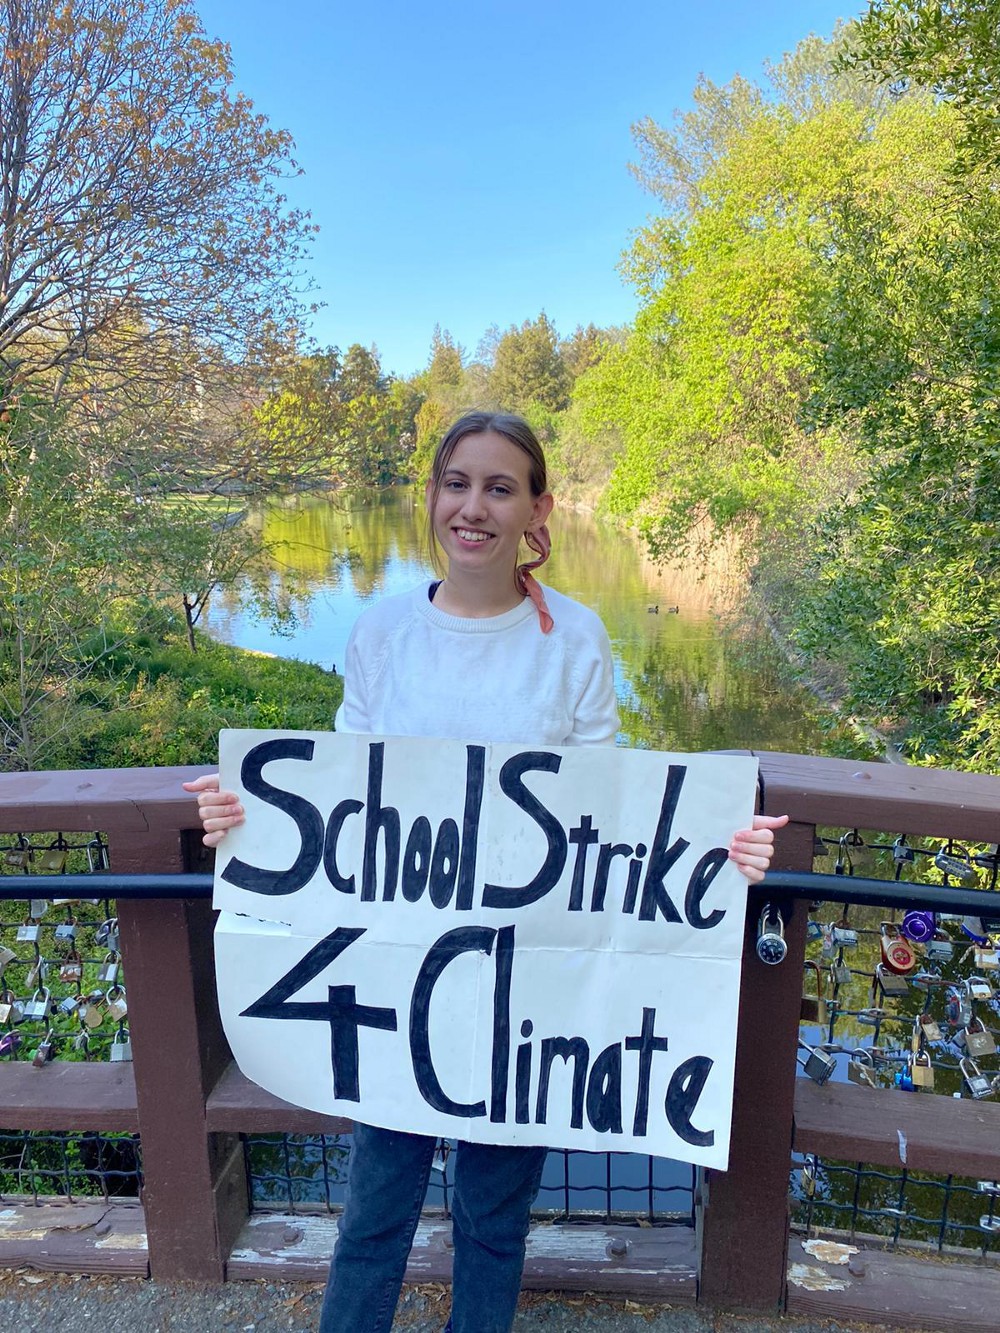 Alexandria Villasenor poses with her “School Strike 4 Climate” sign in New York City. Photo courtesy of Alexandria Villasenor.